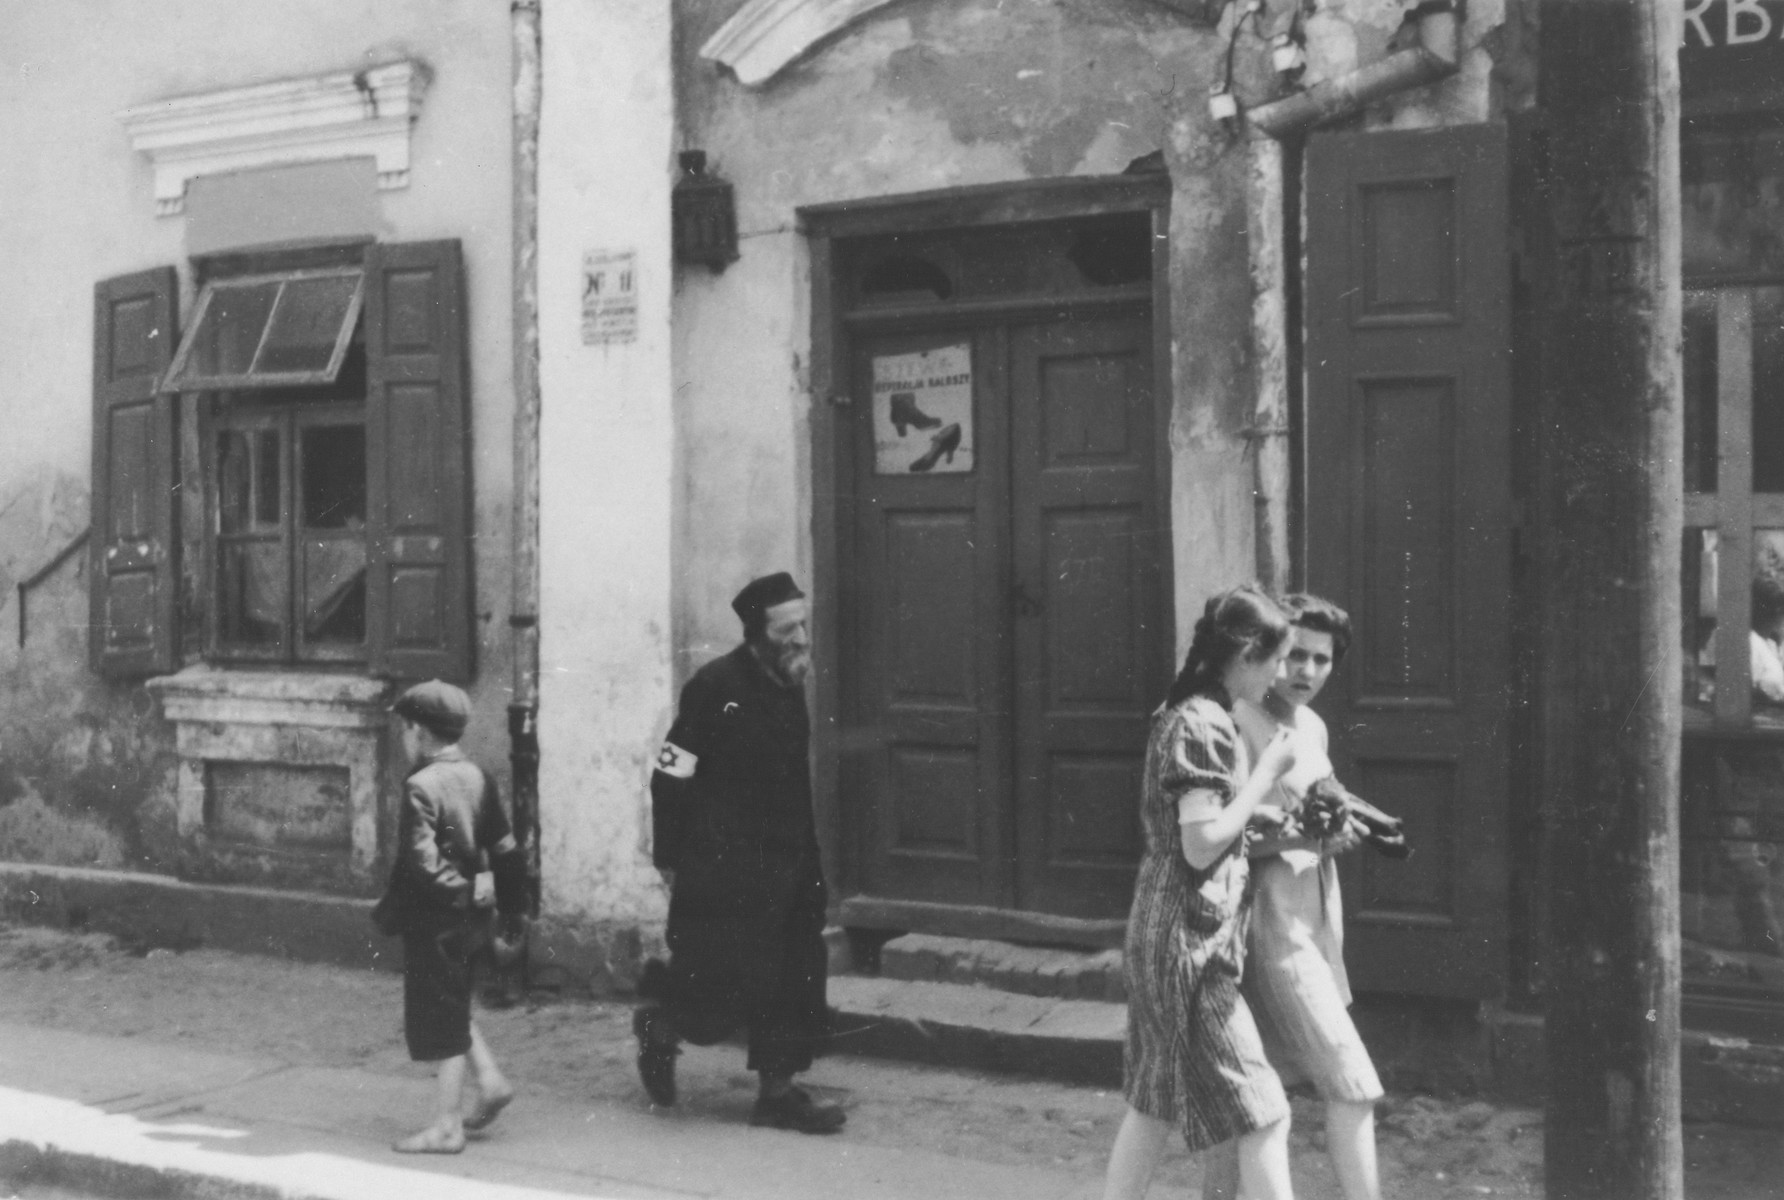 Polish Jews wearing armbands walk down a commercial street in an unidentified ghetto.